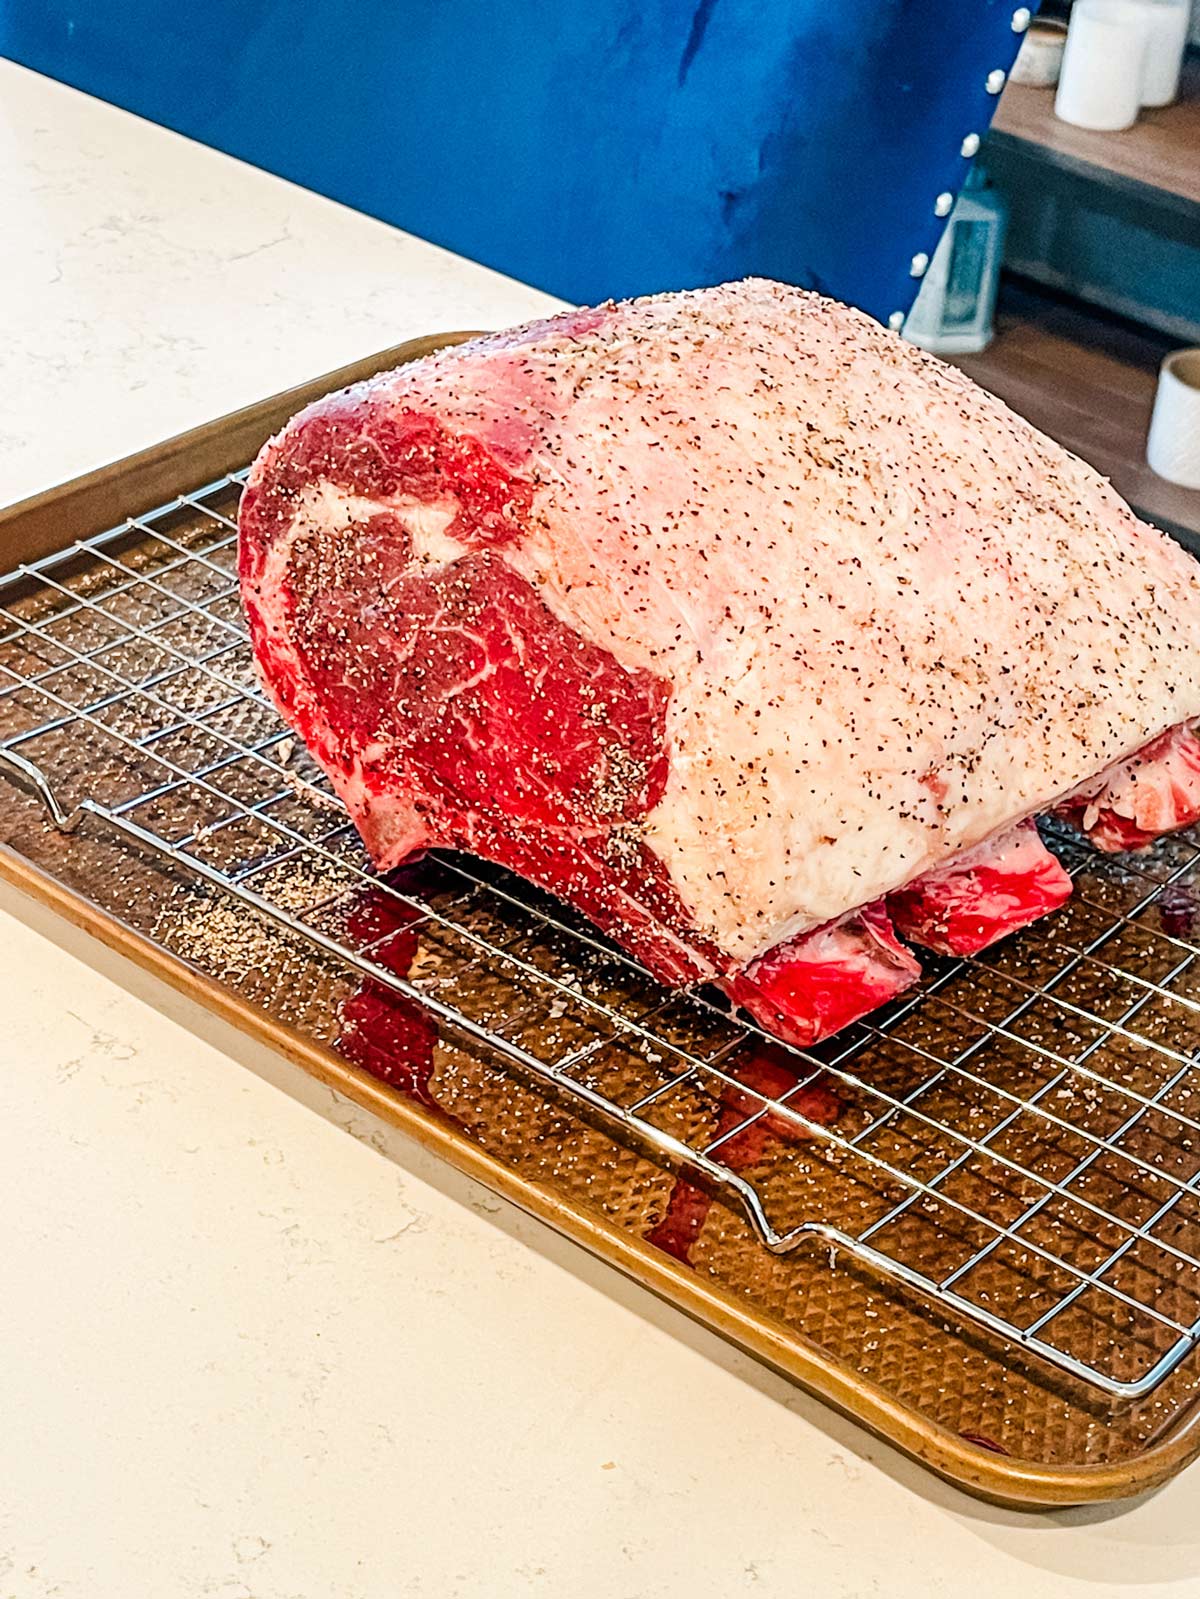 Reverse Sear Prime Rib (Mouthwatering!) - Two Kooks In The Kitchen